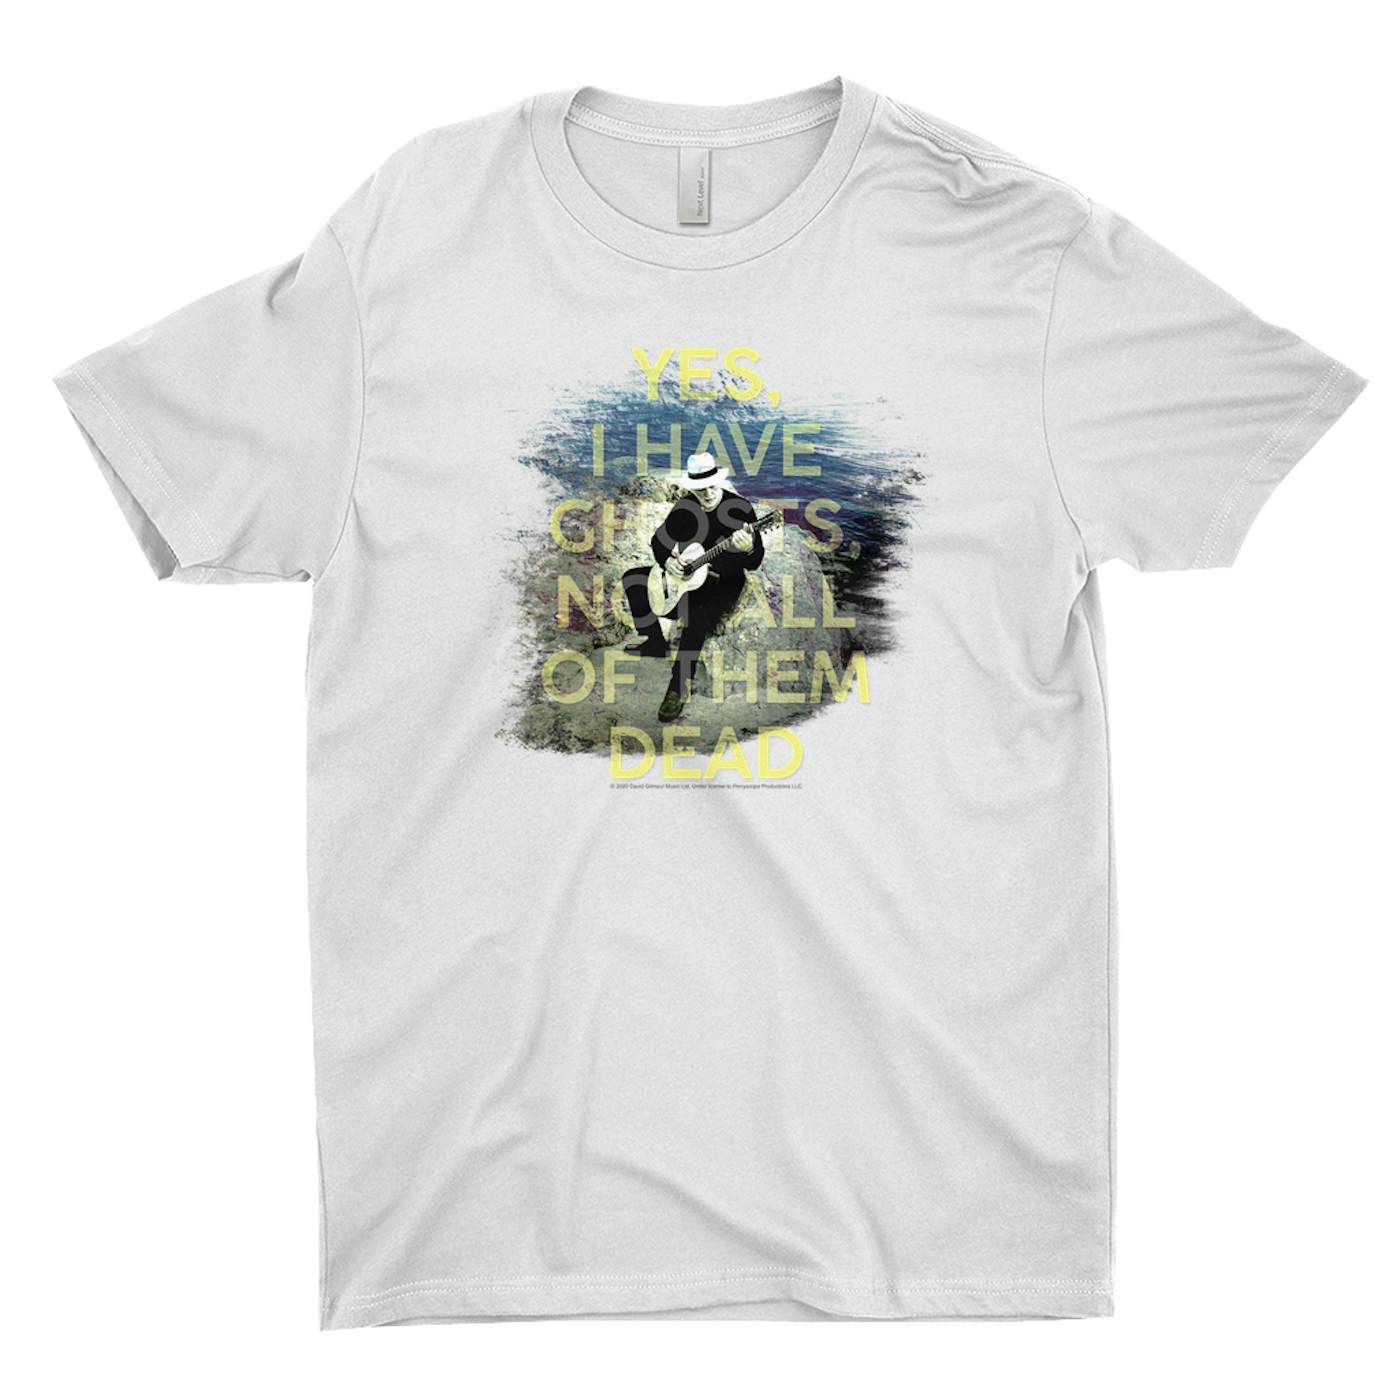 David Gilmour T-Shirt | Yes, I Have Ghosts David Gilmour Shirt